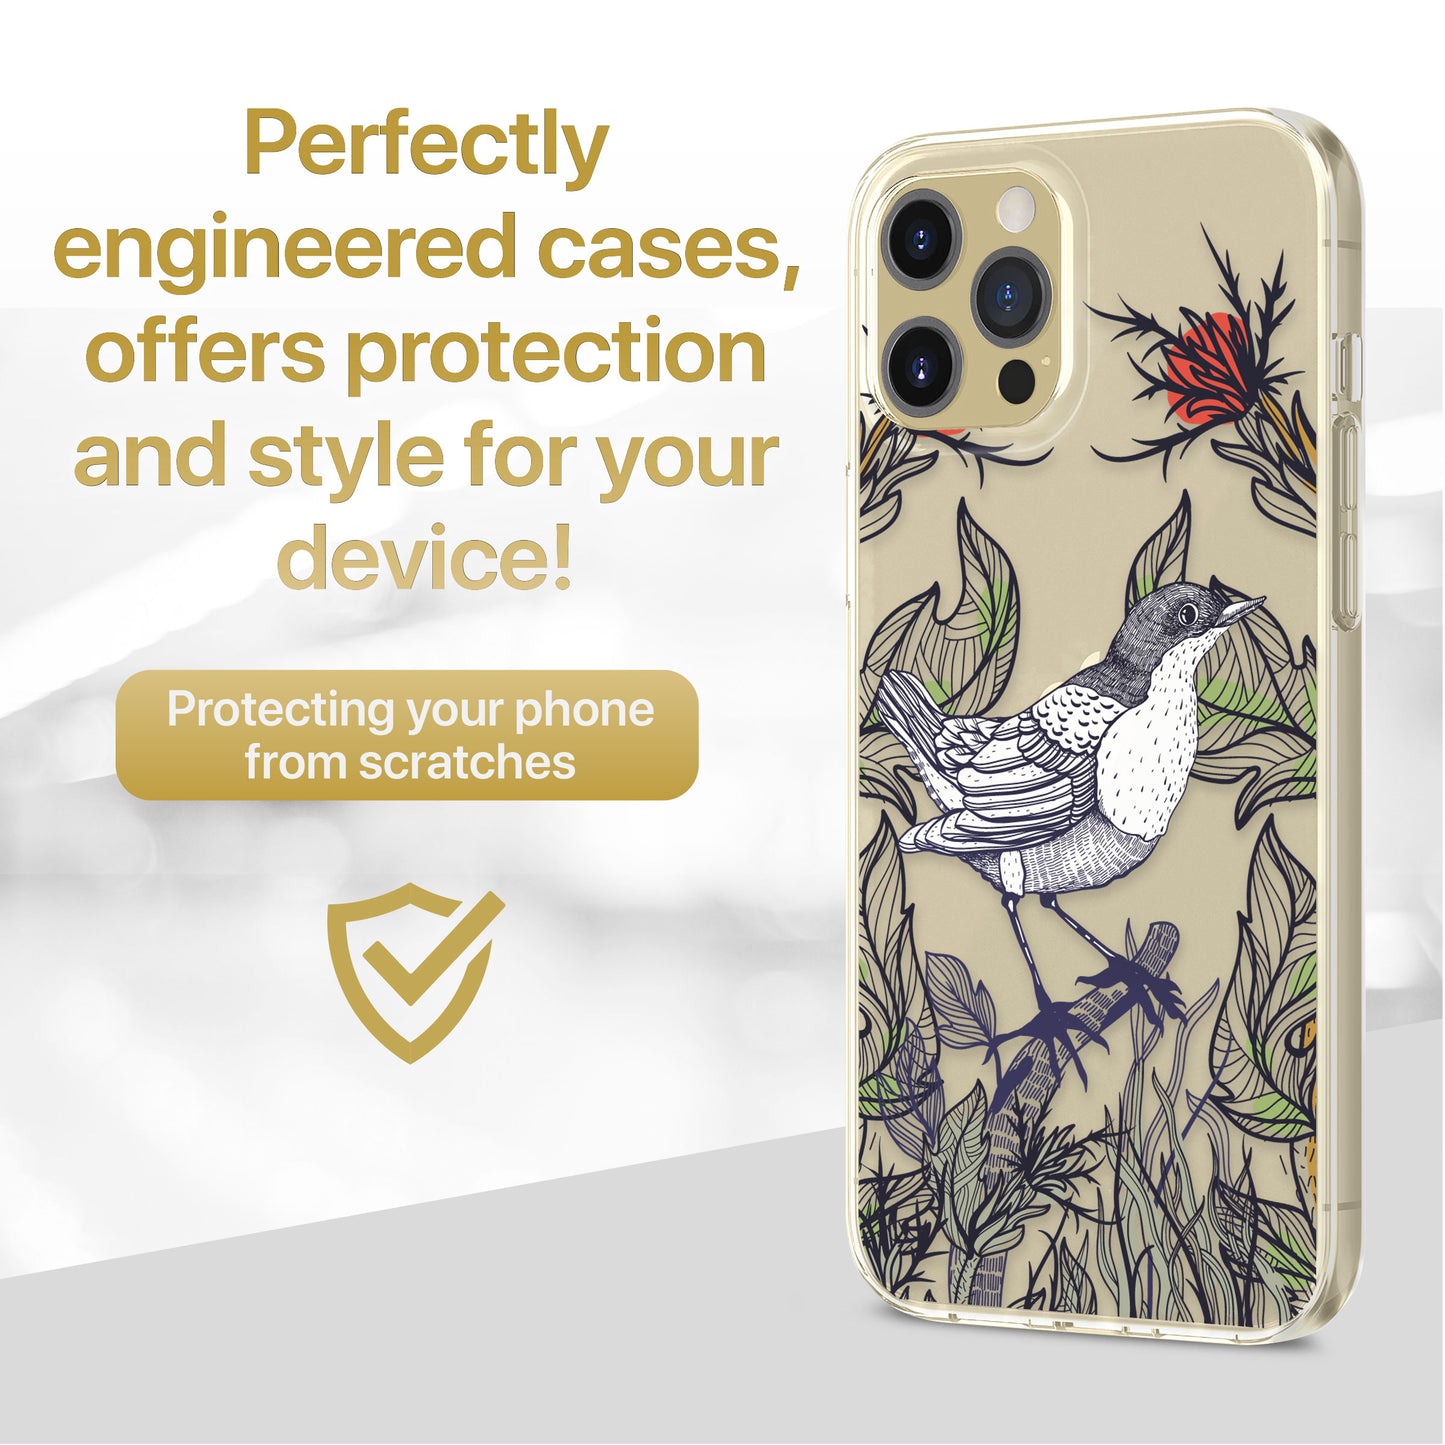 TPU Case Clear case with (Cute Cactus) Design for iPhone & Samsung Phones